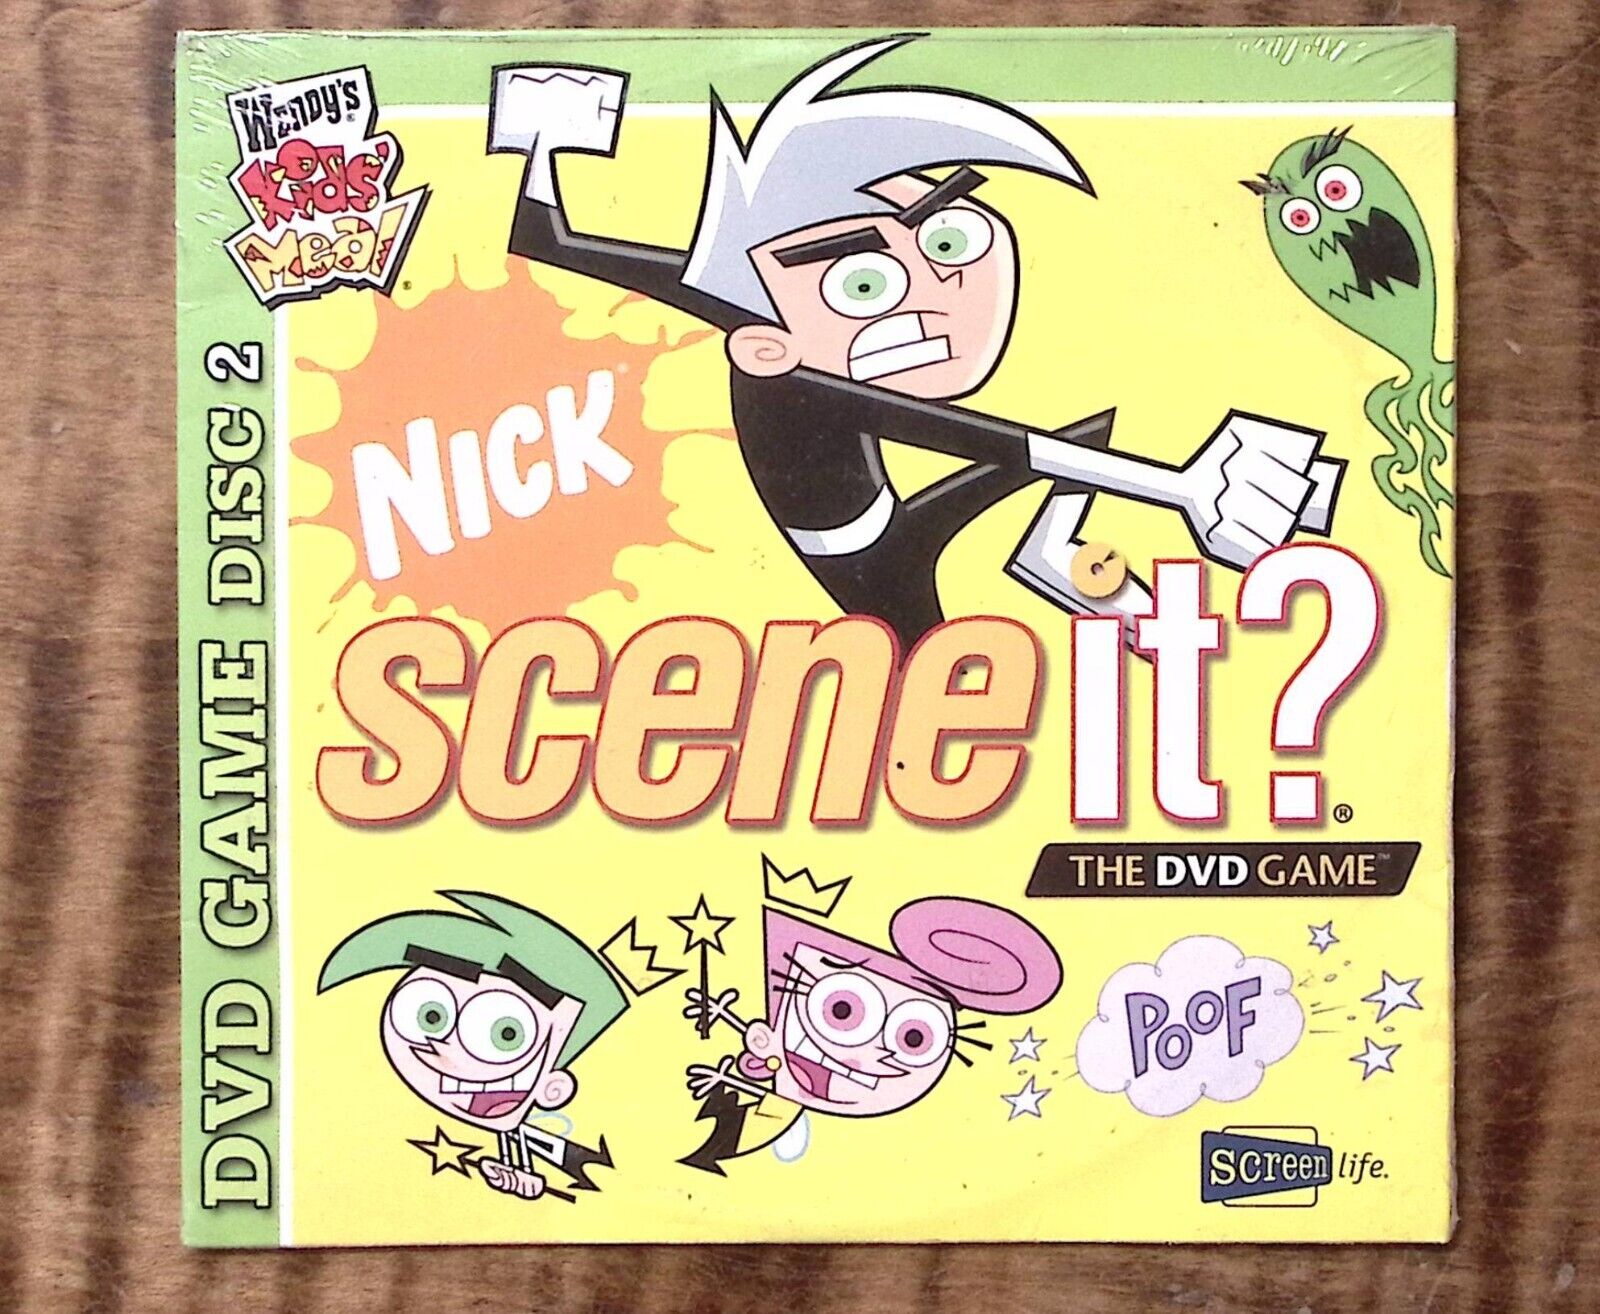 WENDY\'S KIDS MEAL NICK SCENE IT? THE DVD GAME DISC 2 FACTORY SEALED  CD 3790